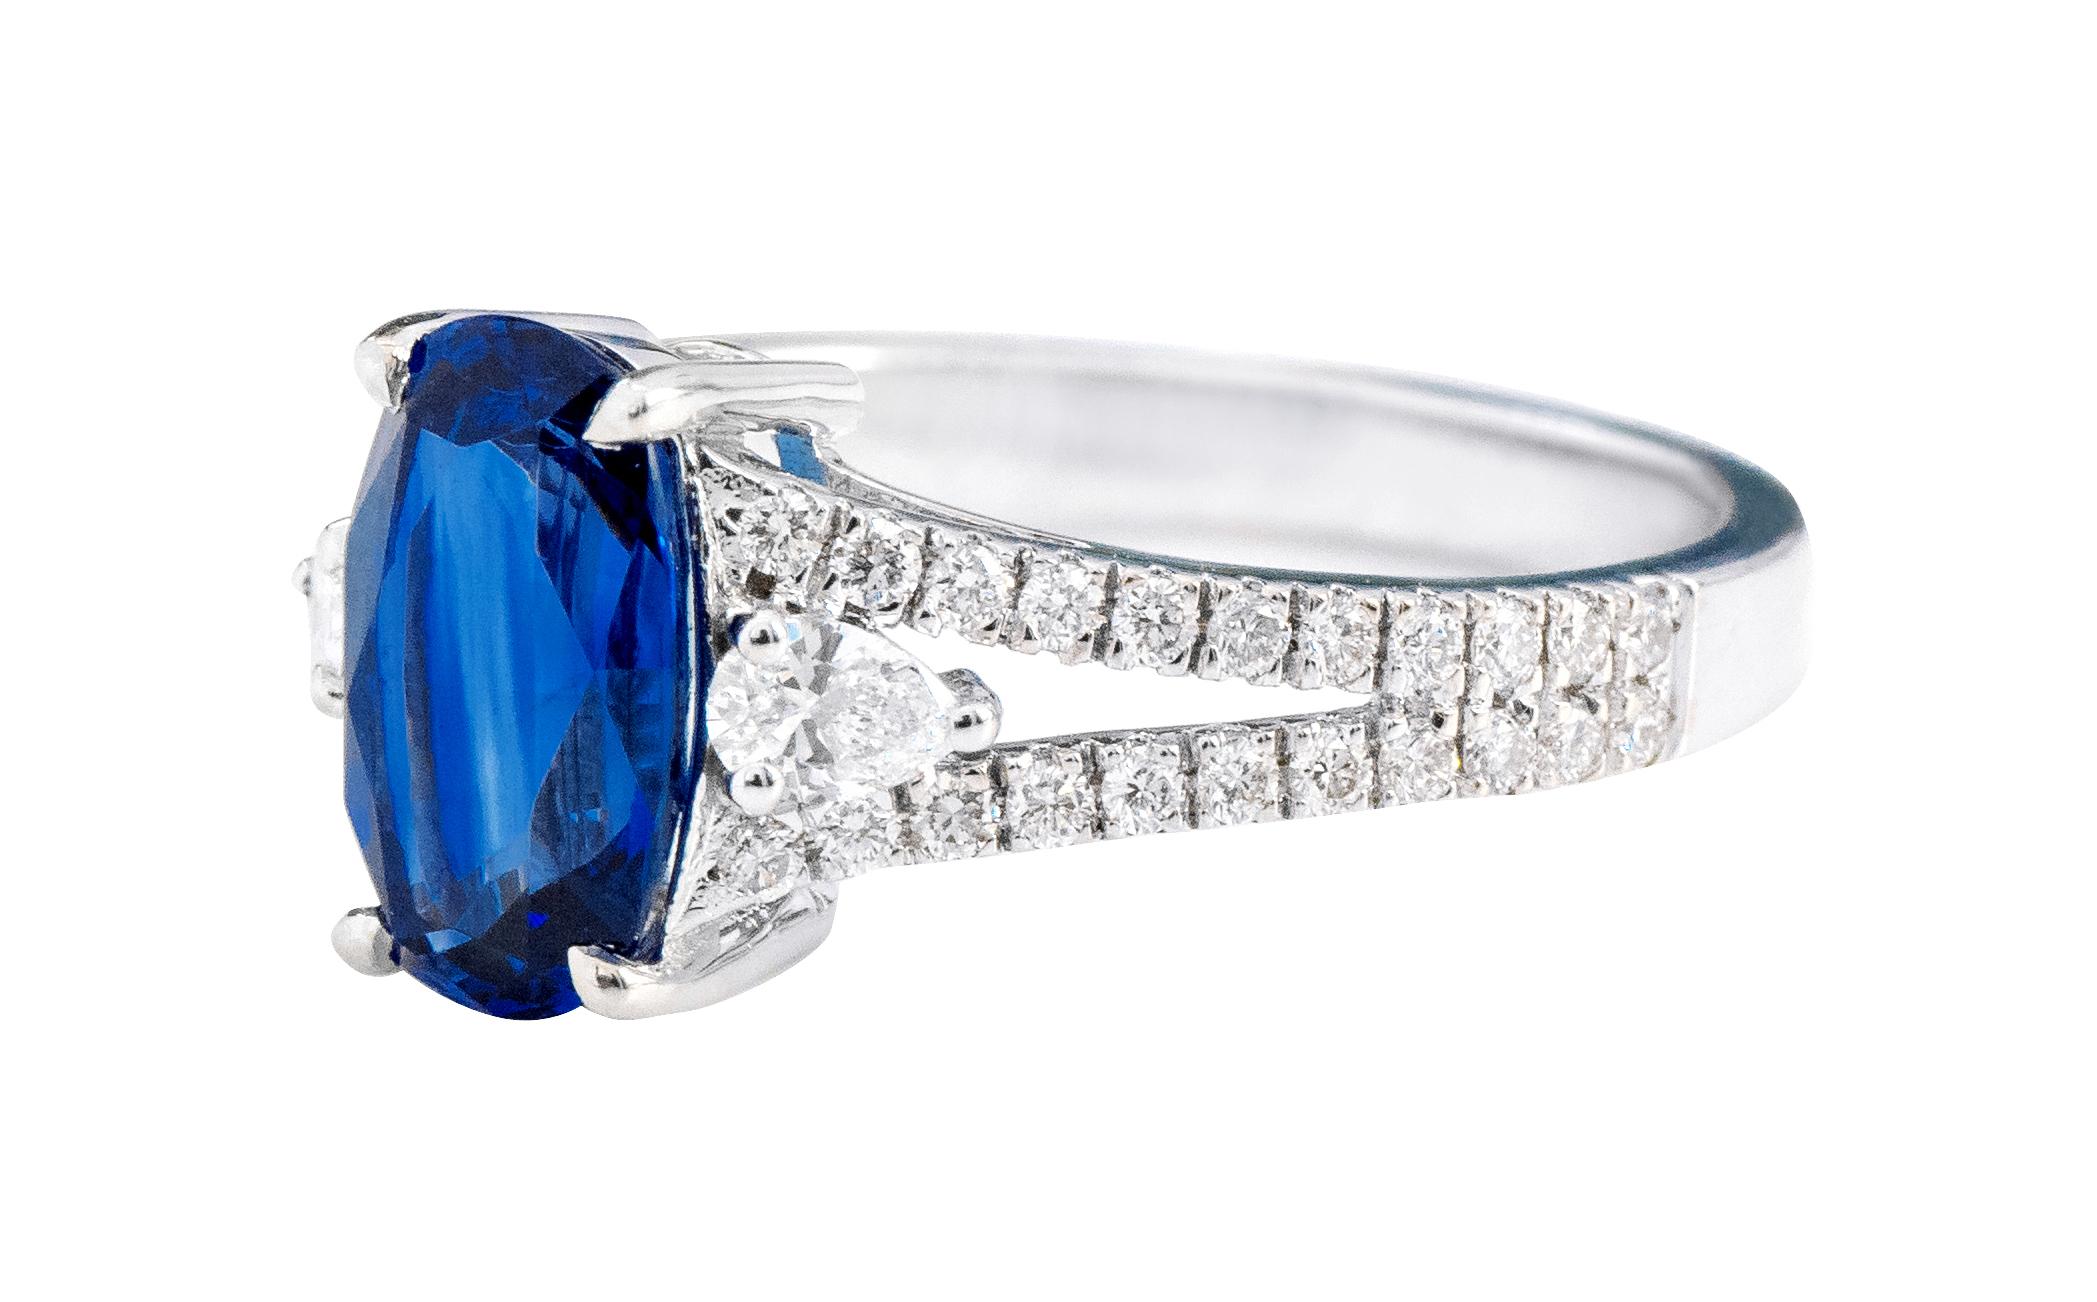 18 Karat White Gold 2.24 Carat Oval-Cut Sapphire and Diamond Three-Stone Ring

This magnificent admiral blue sapphire and diamond ring is captivating. The three-stone trinity ring tells a story by not only representing the said “past, present, and